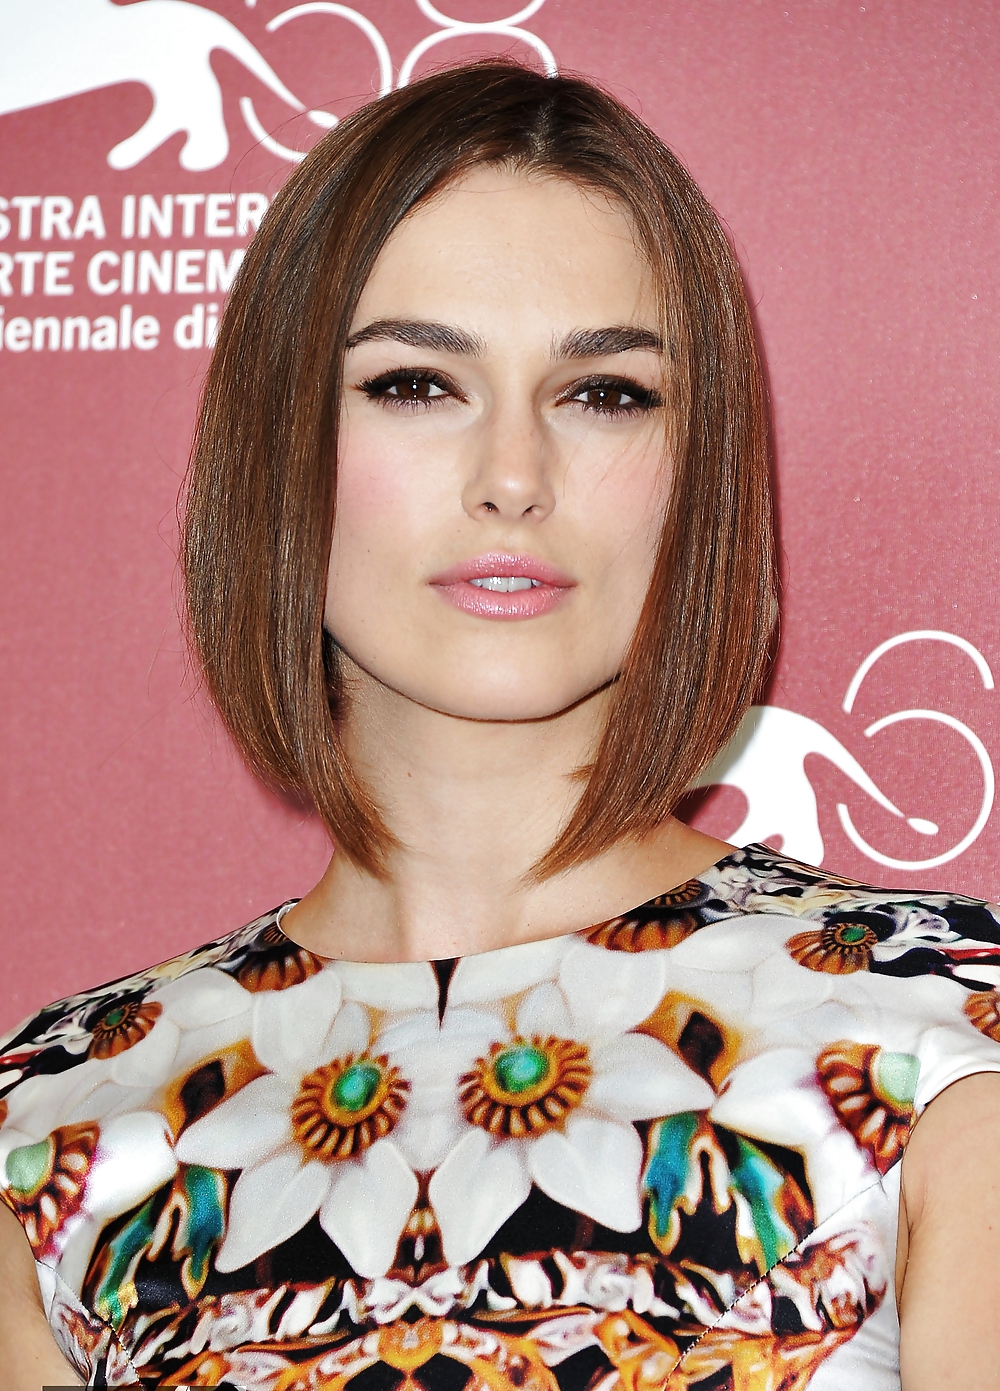 Keira Knightley The Royal Lady of England #35650225